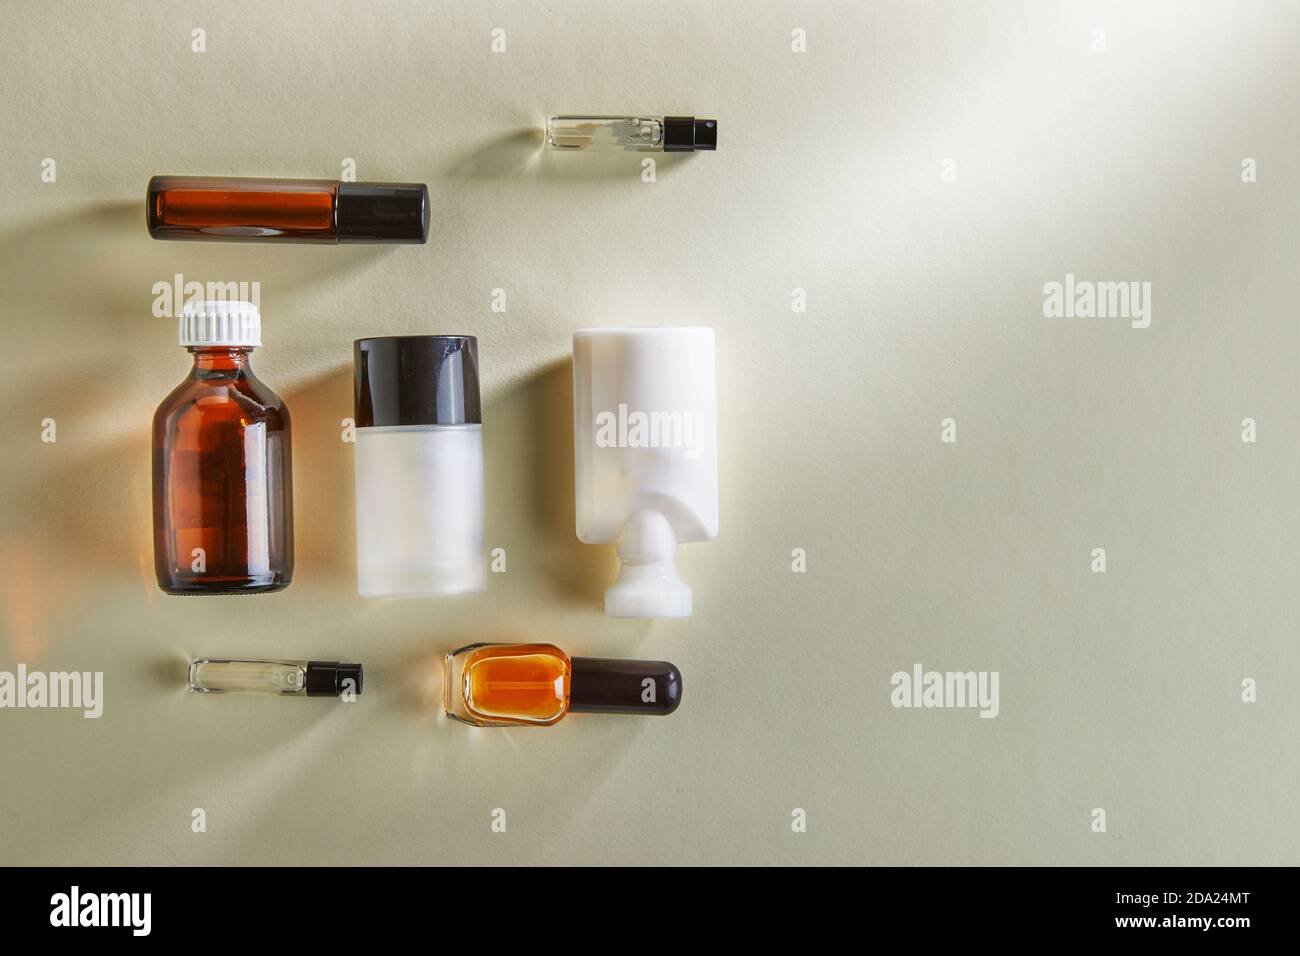 Variety of blanks for hand cream, perfumery, shower gel, bottles without labels on a white background with shadows. Flat lay Stock Photo